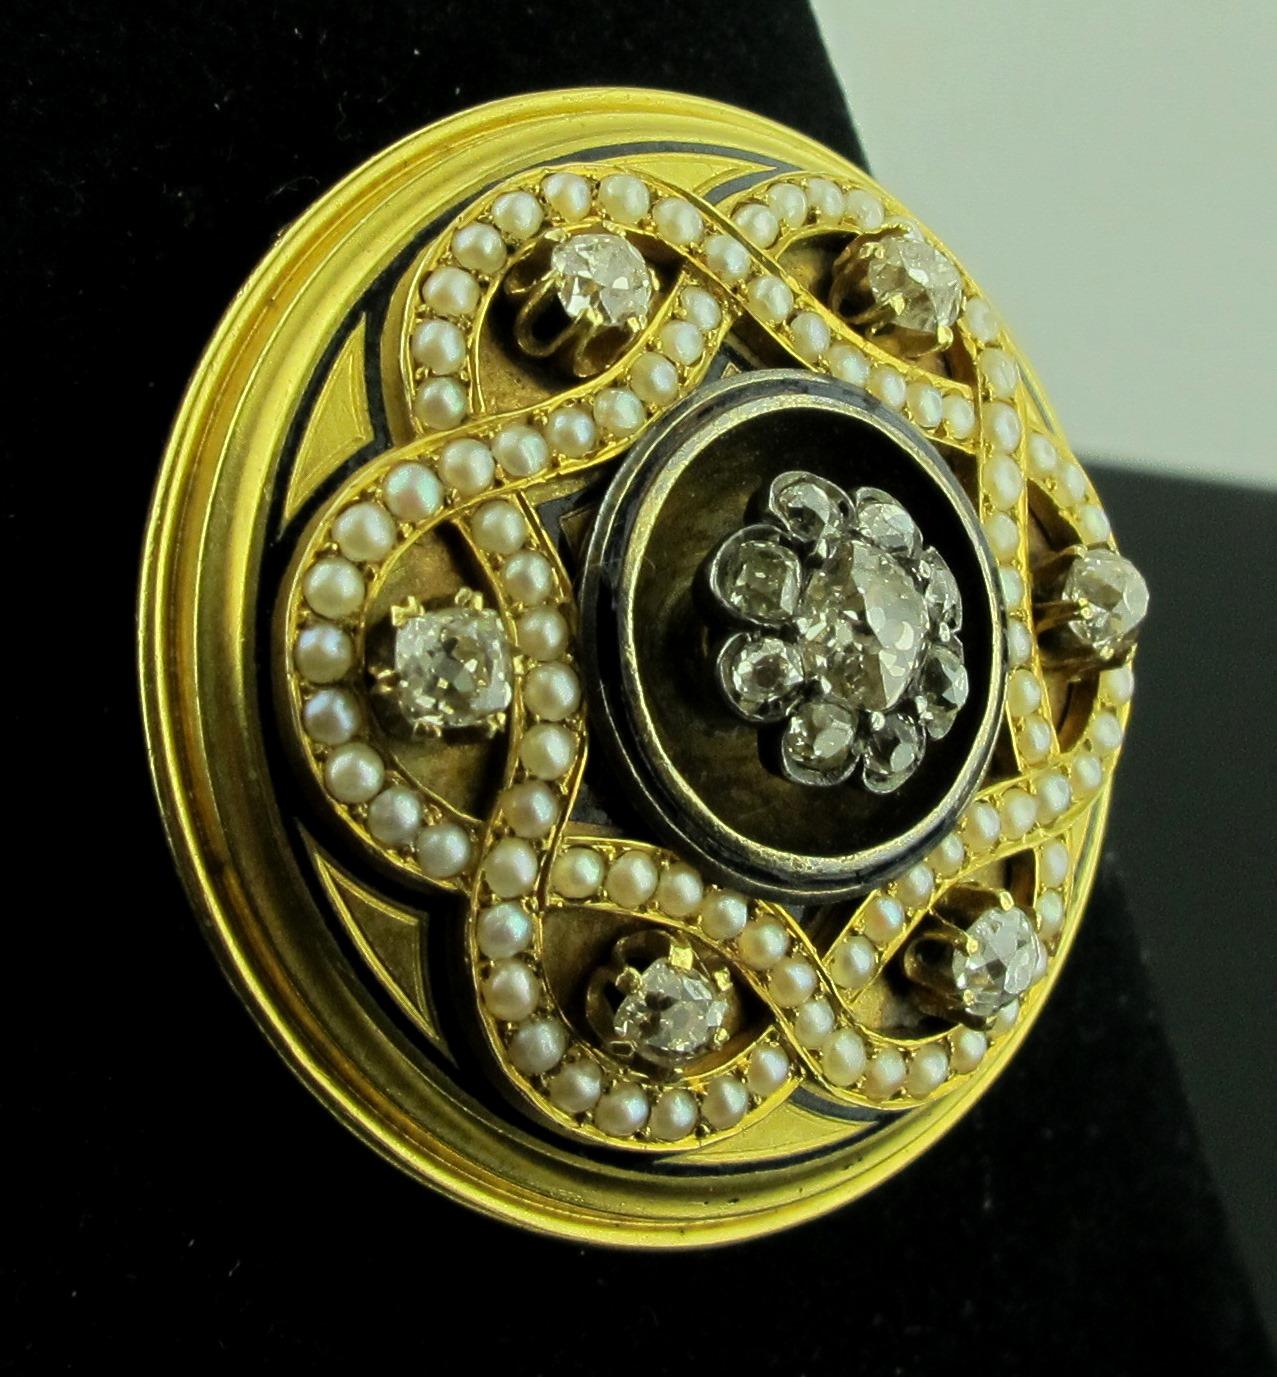 This vintage brooch is set in 14 karat yellow gold and includes 15 Old Mine cut diamonds with a total diamond weight of 1.50 carats. Pearls are in a woven pattern around 6 diamonds.  Gold weight is 23 grams.